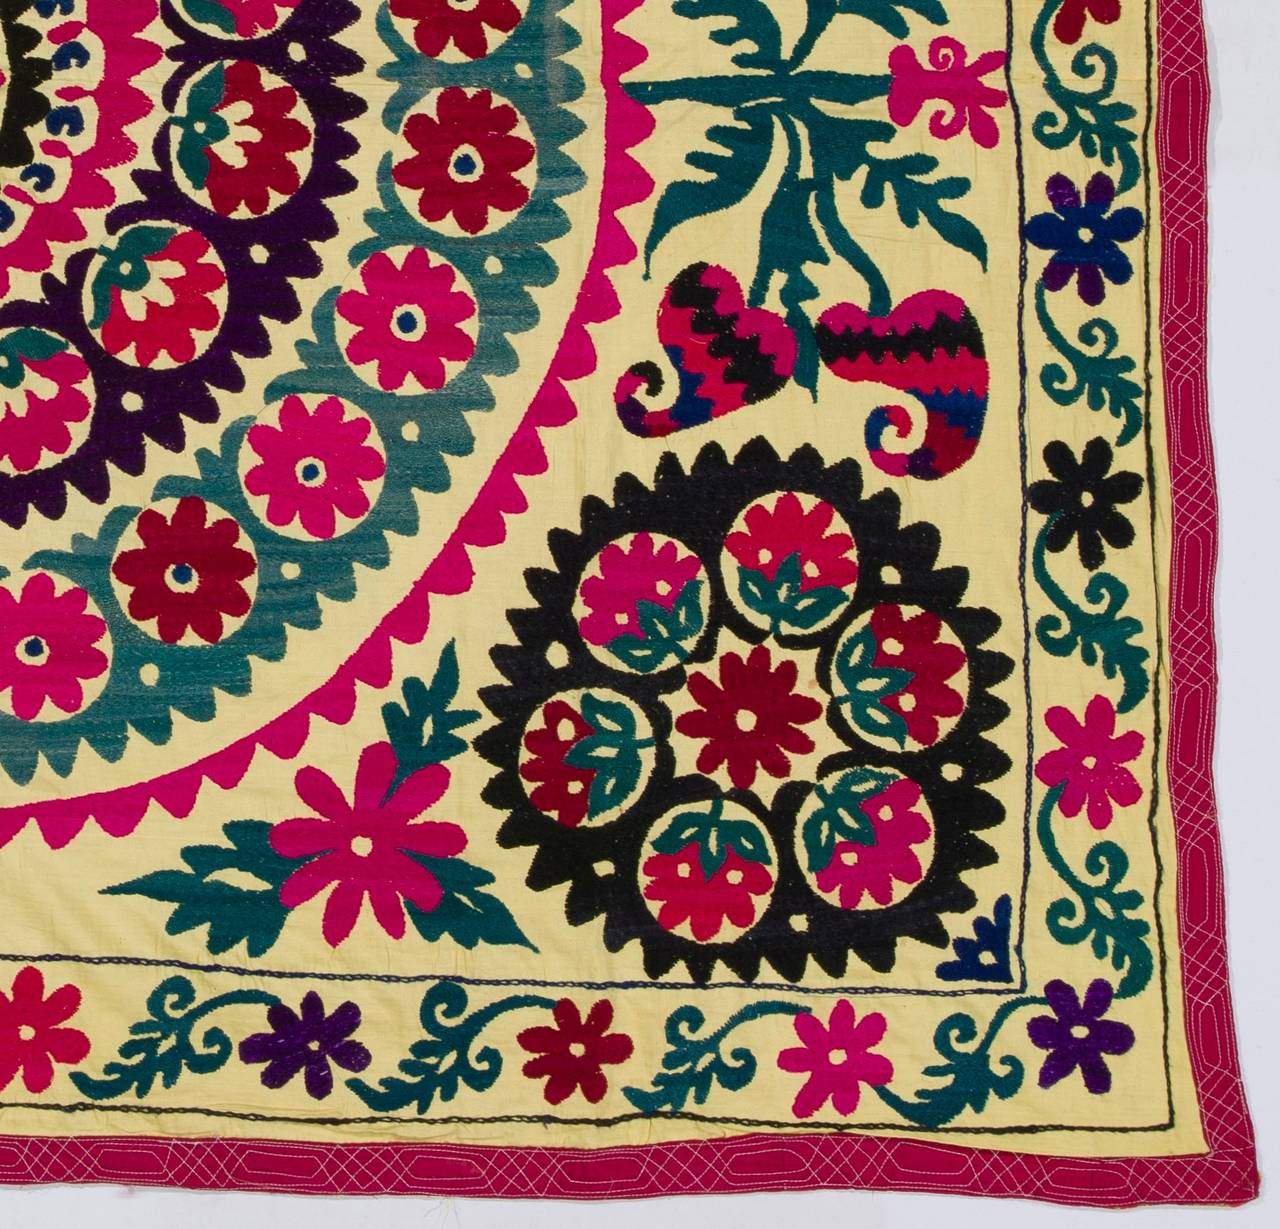 A vintage decorative handmade needlework from Uzbekistan in Central Asia. This fine cotton embroidery with silk highlights can be used in various ways such as a wall-hanging, a bed or table cover or as sofa throw.